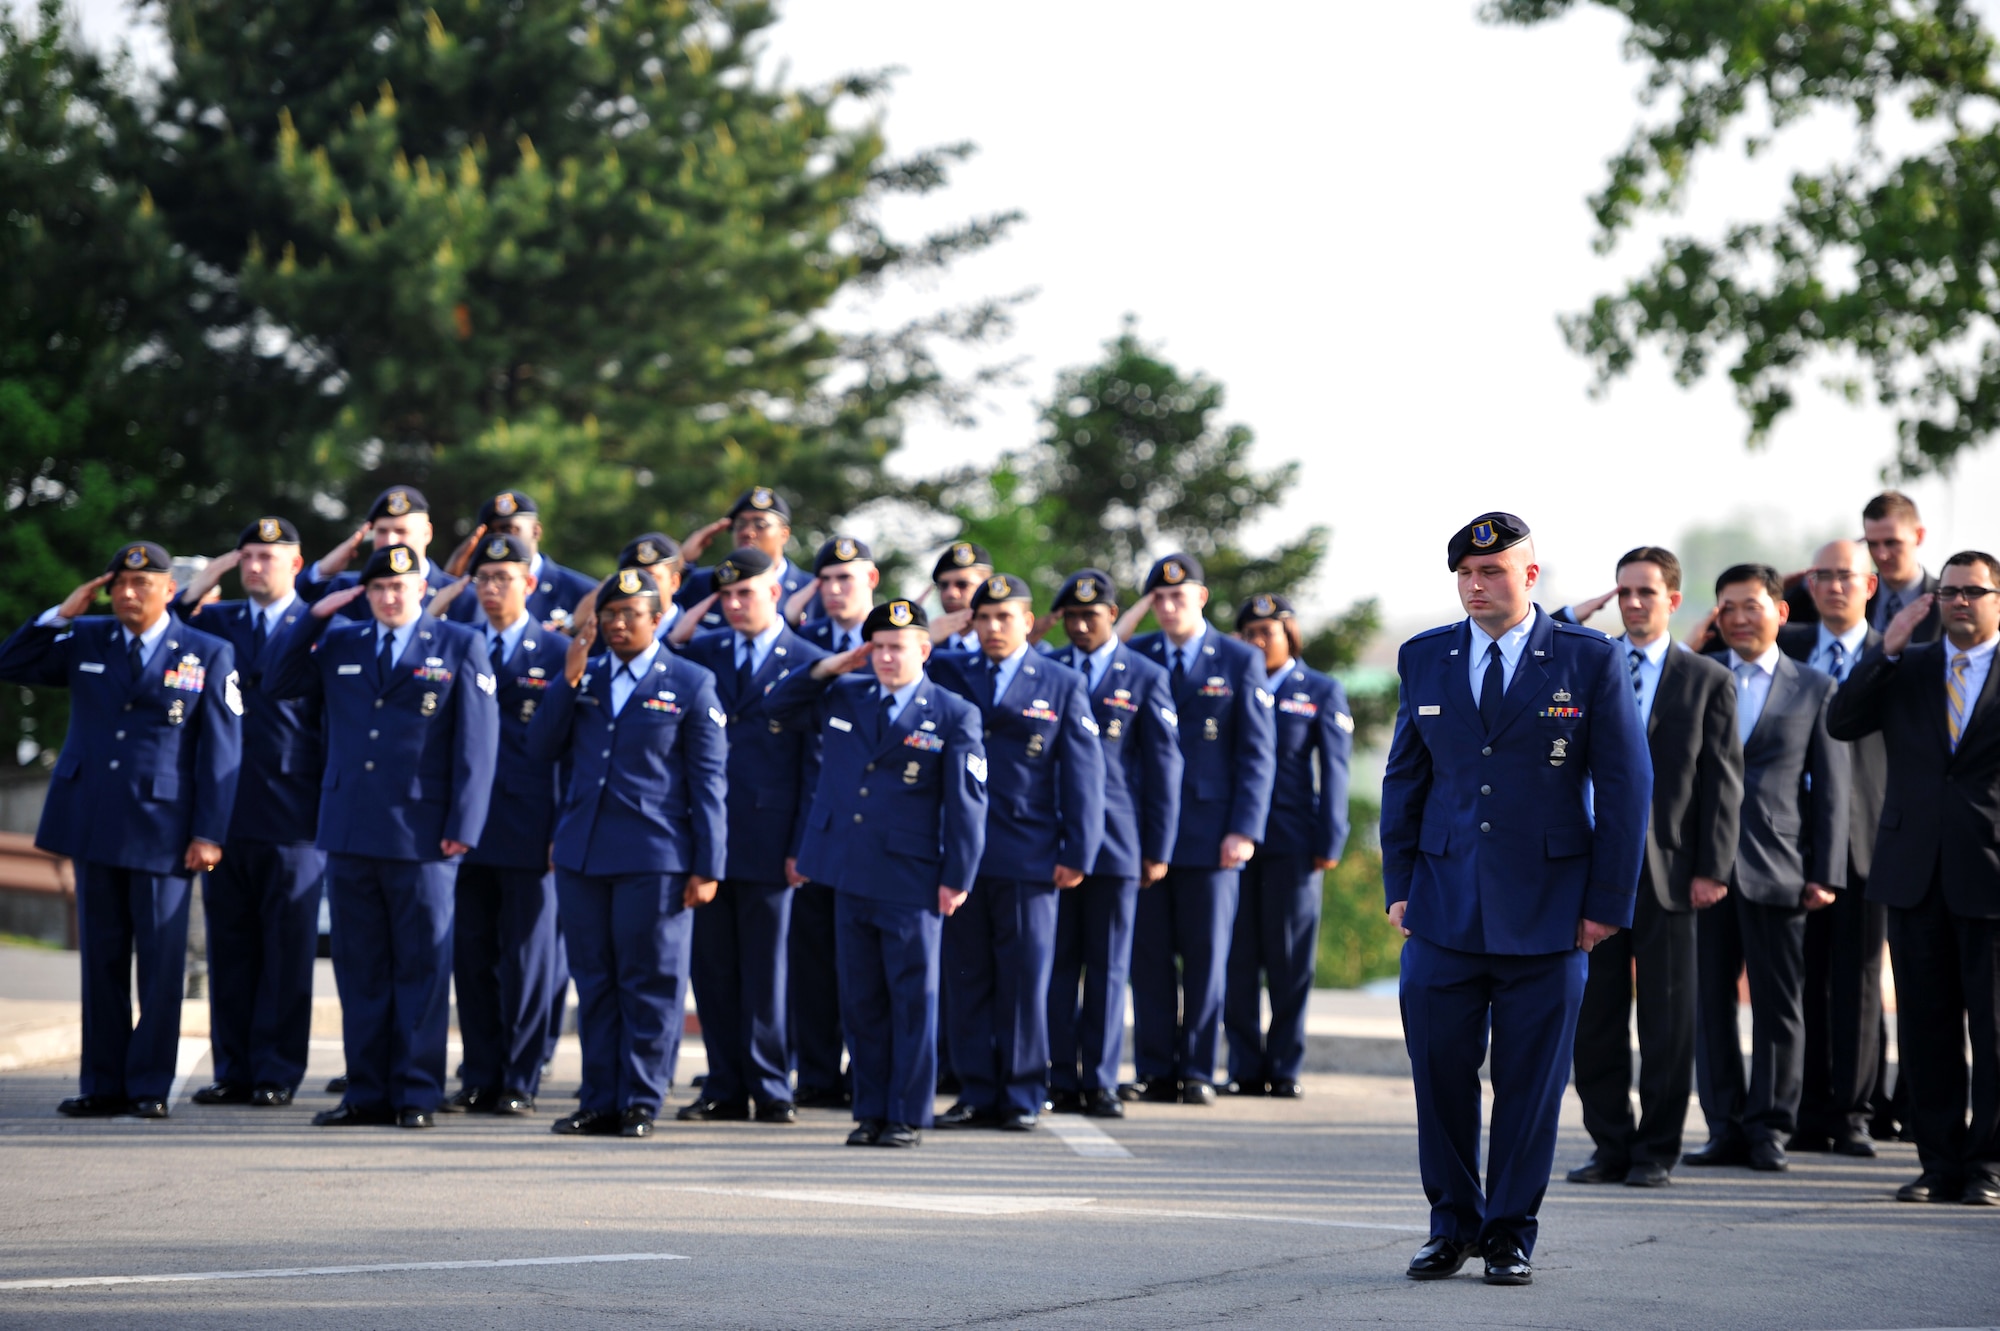 Airmen from the 51st Security Forces Squadron and Office of Special Investigations salute during a retreat ceremony at Osan Air Base, Republic of Korea, May 13, 2013. The ceremony kicked off an annual week-long observance that’s held to honor the memory and sacrifices made by individuals in the security forces and Office of Special Investigations career fields. (U.S. Air Force photo/Staff Sgt. Emerson Nuñez)